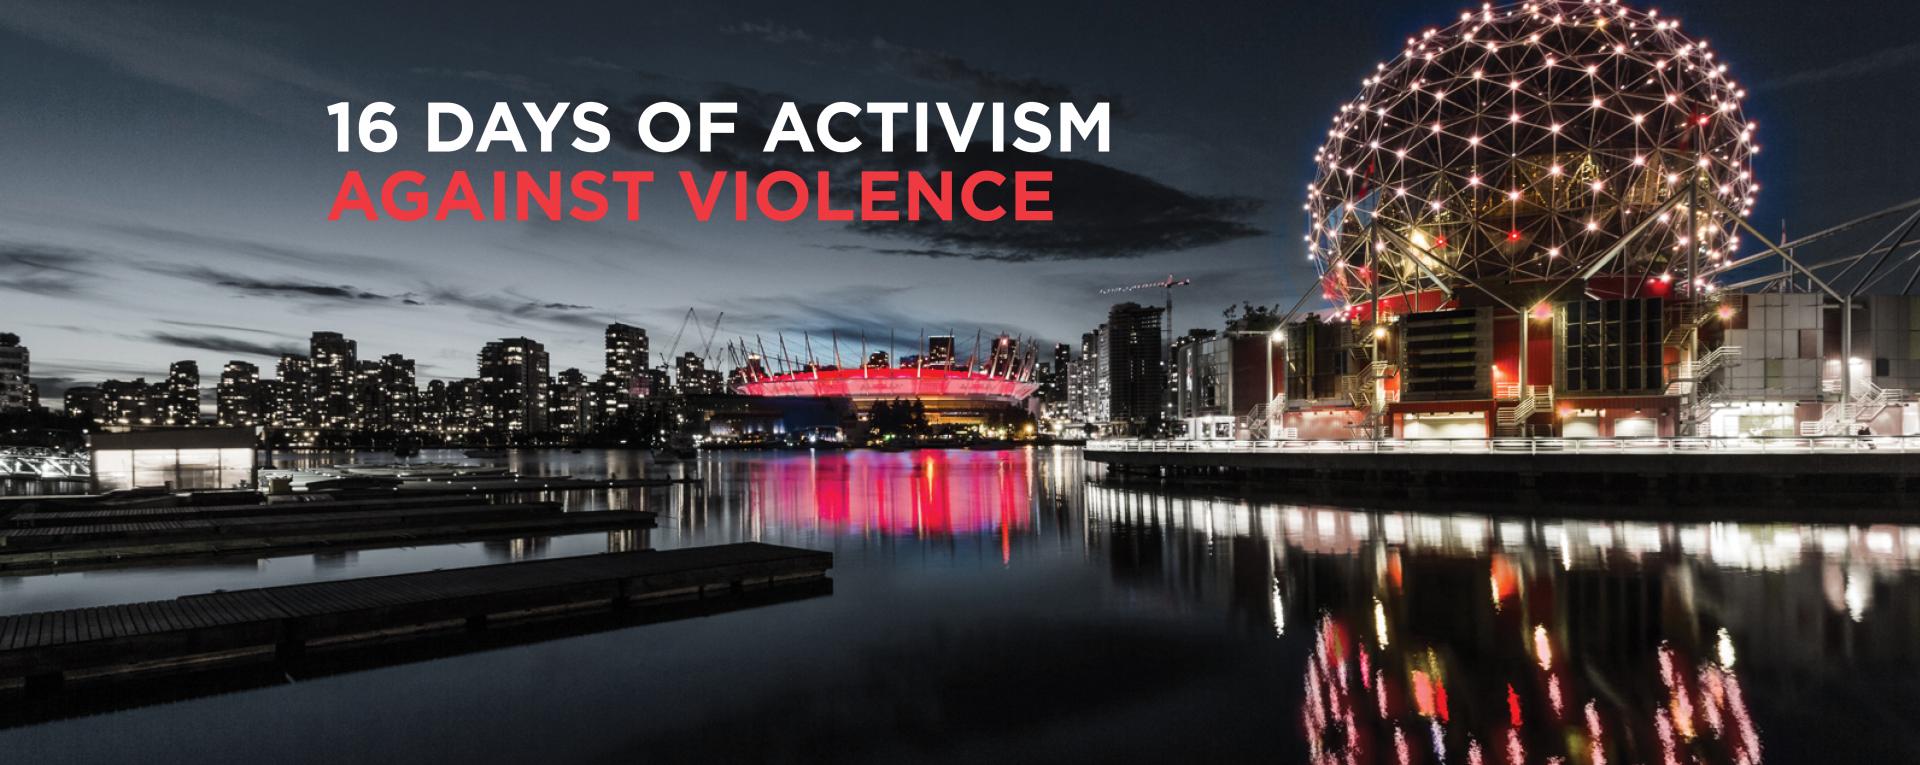 16 Days of Activism: What You Can Do to End Gender-Based Violence